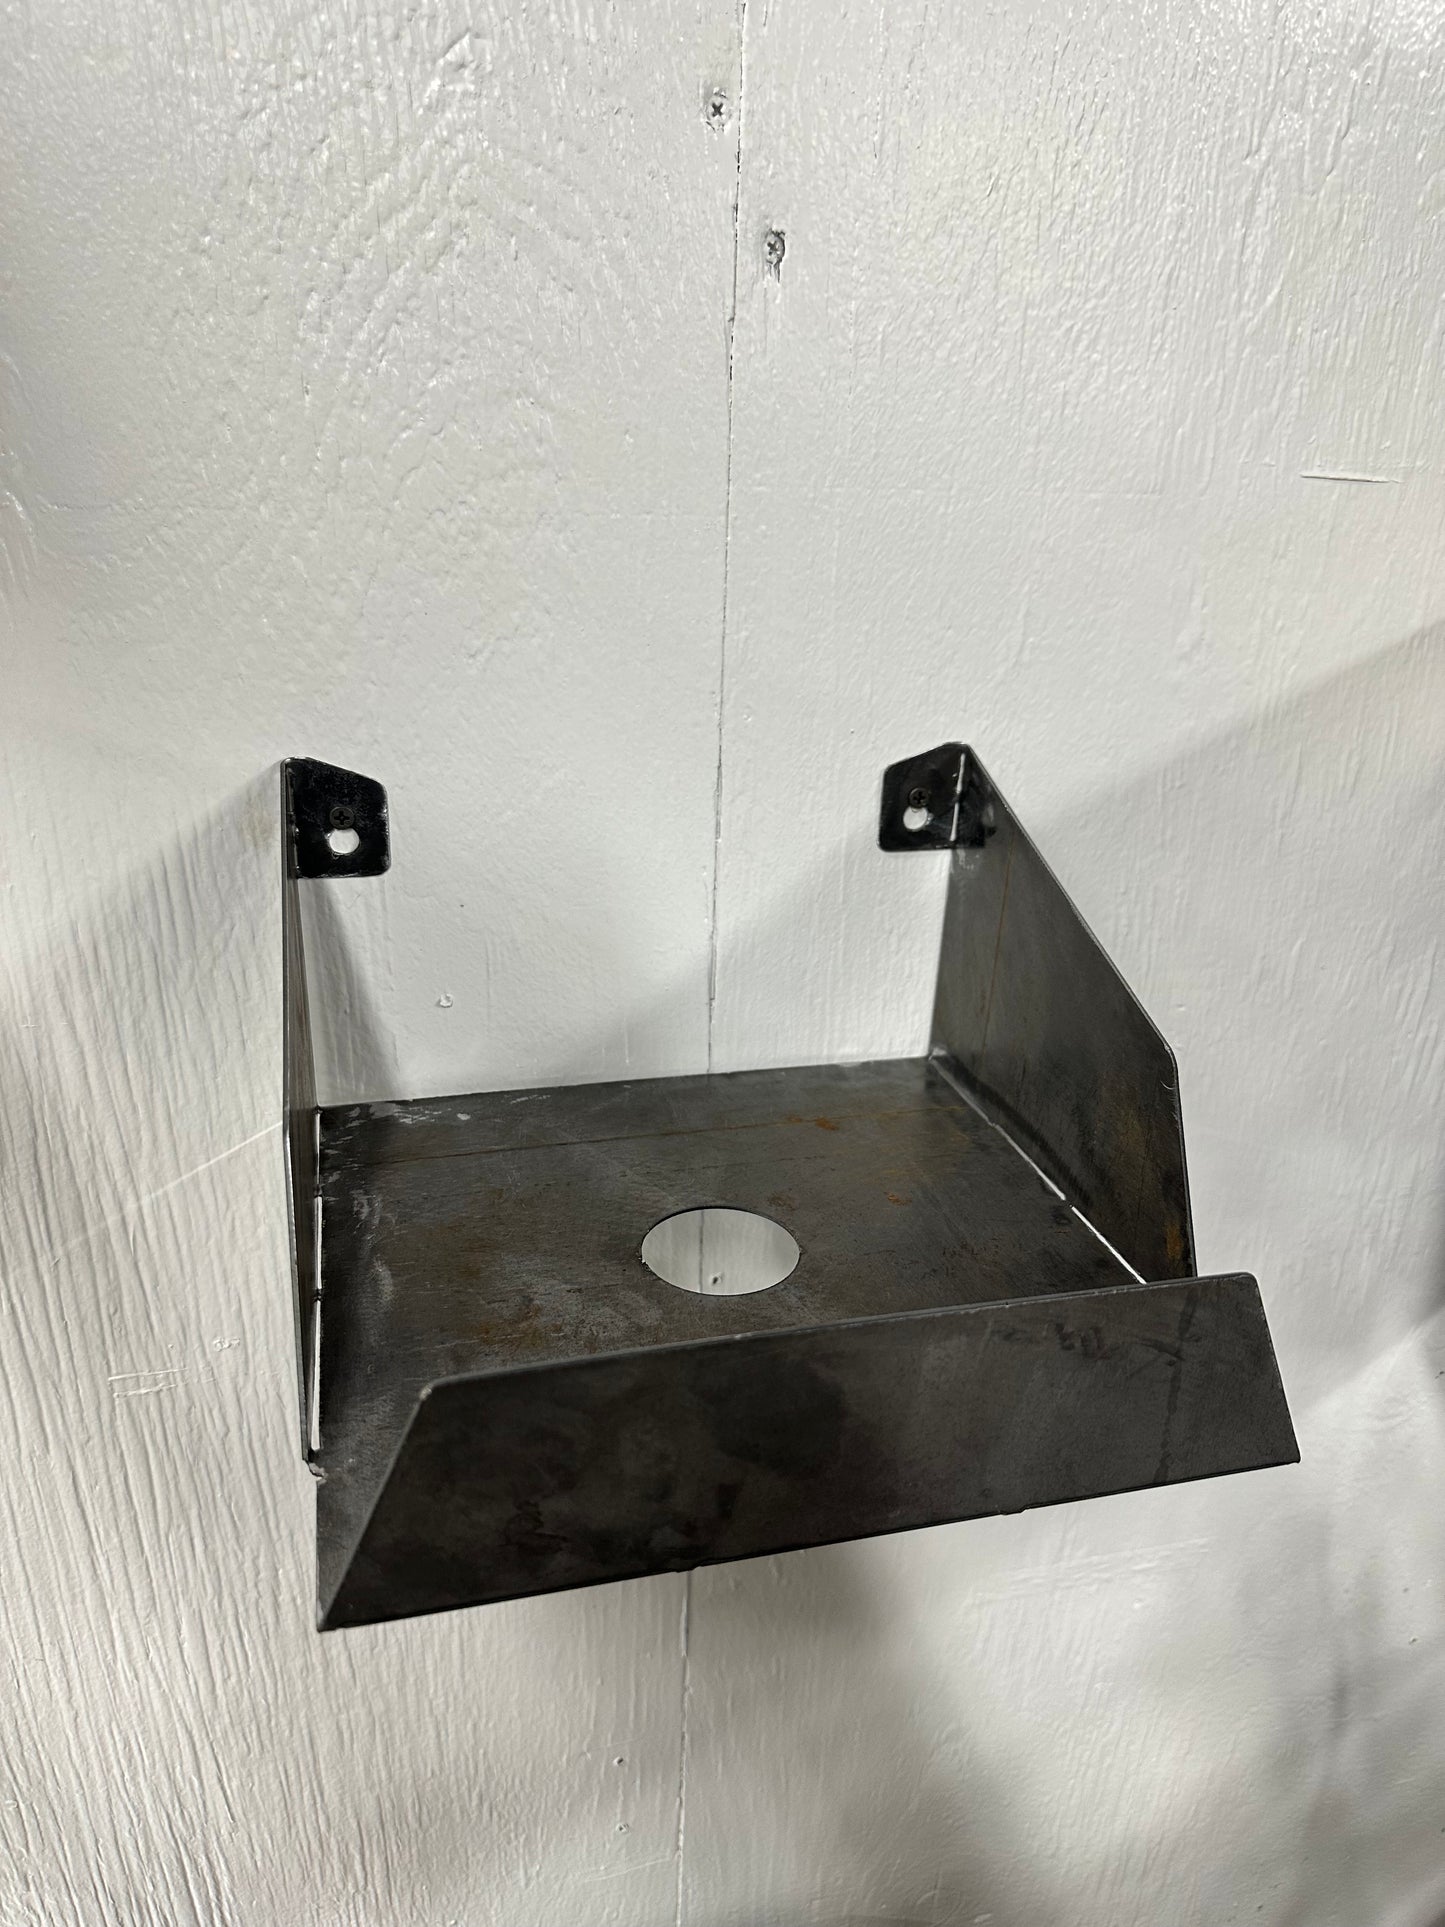 Wall Mount Holder for a Box of Shop Rags